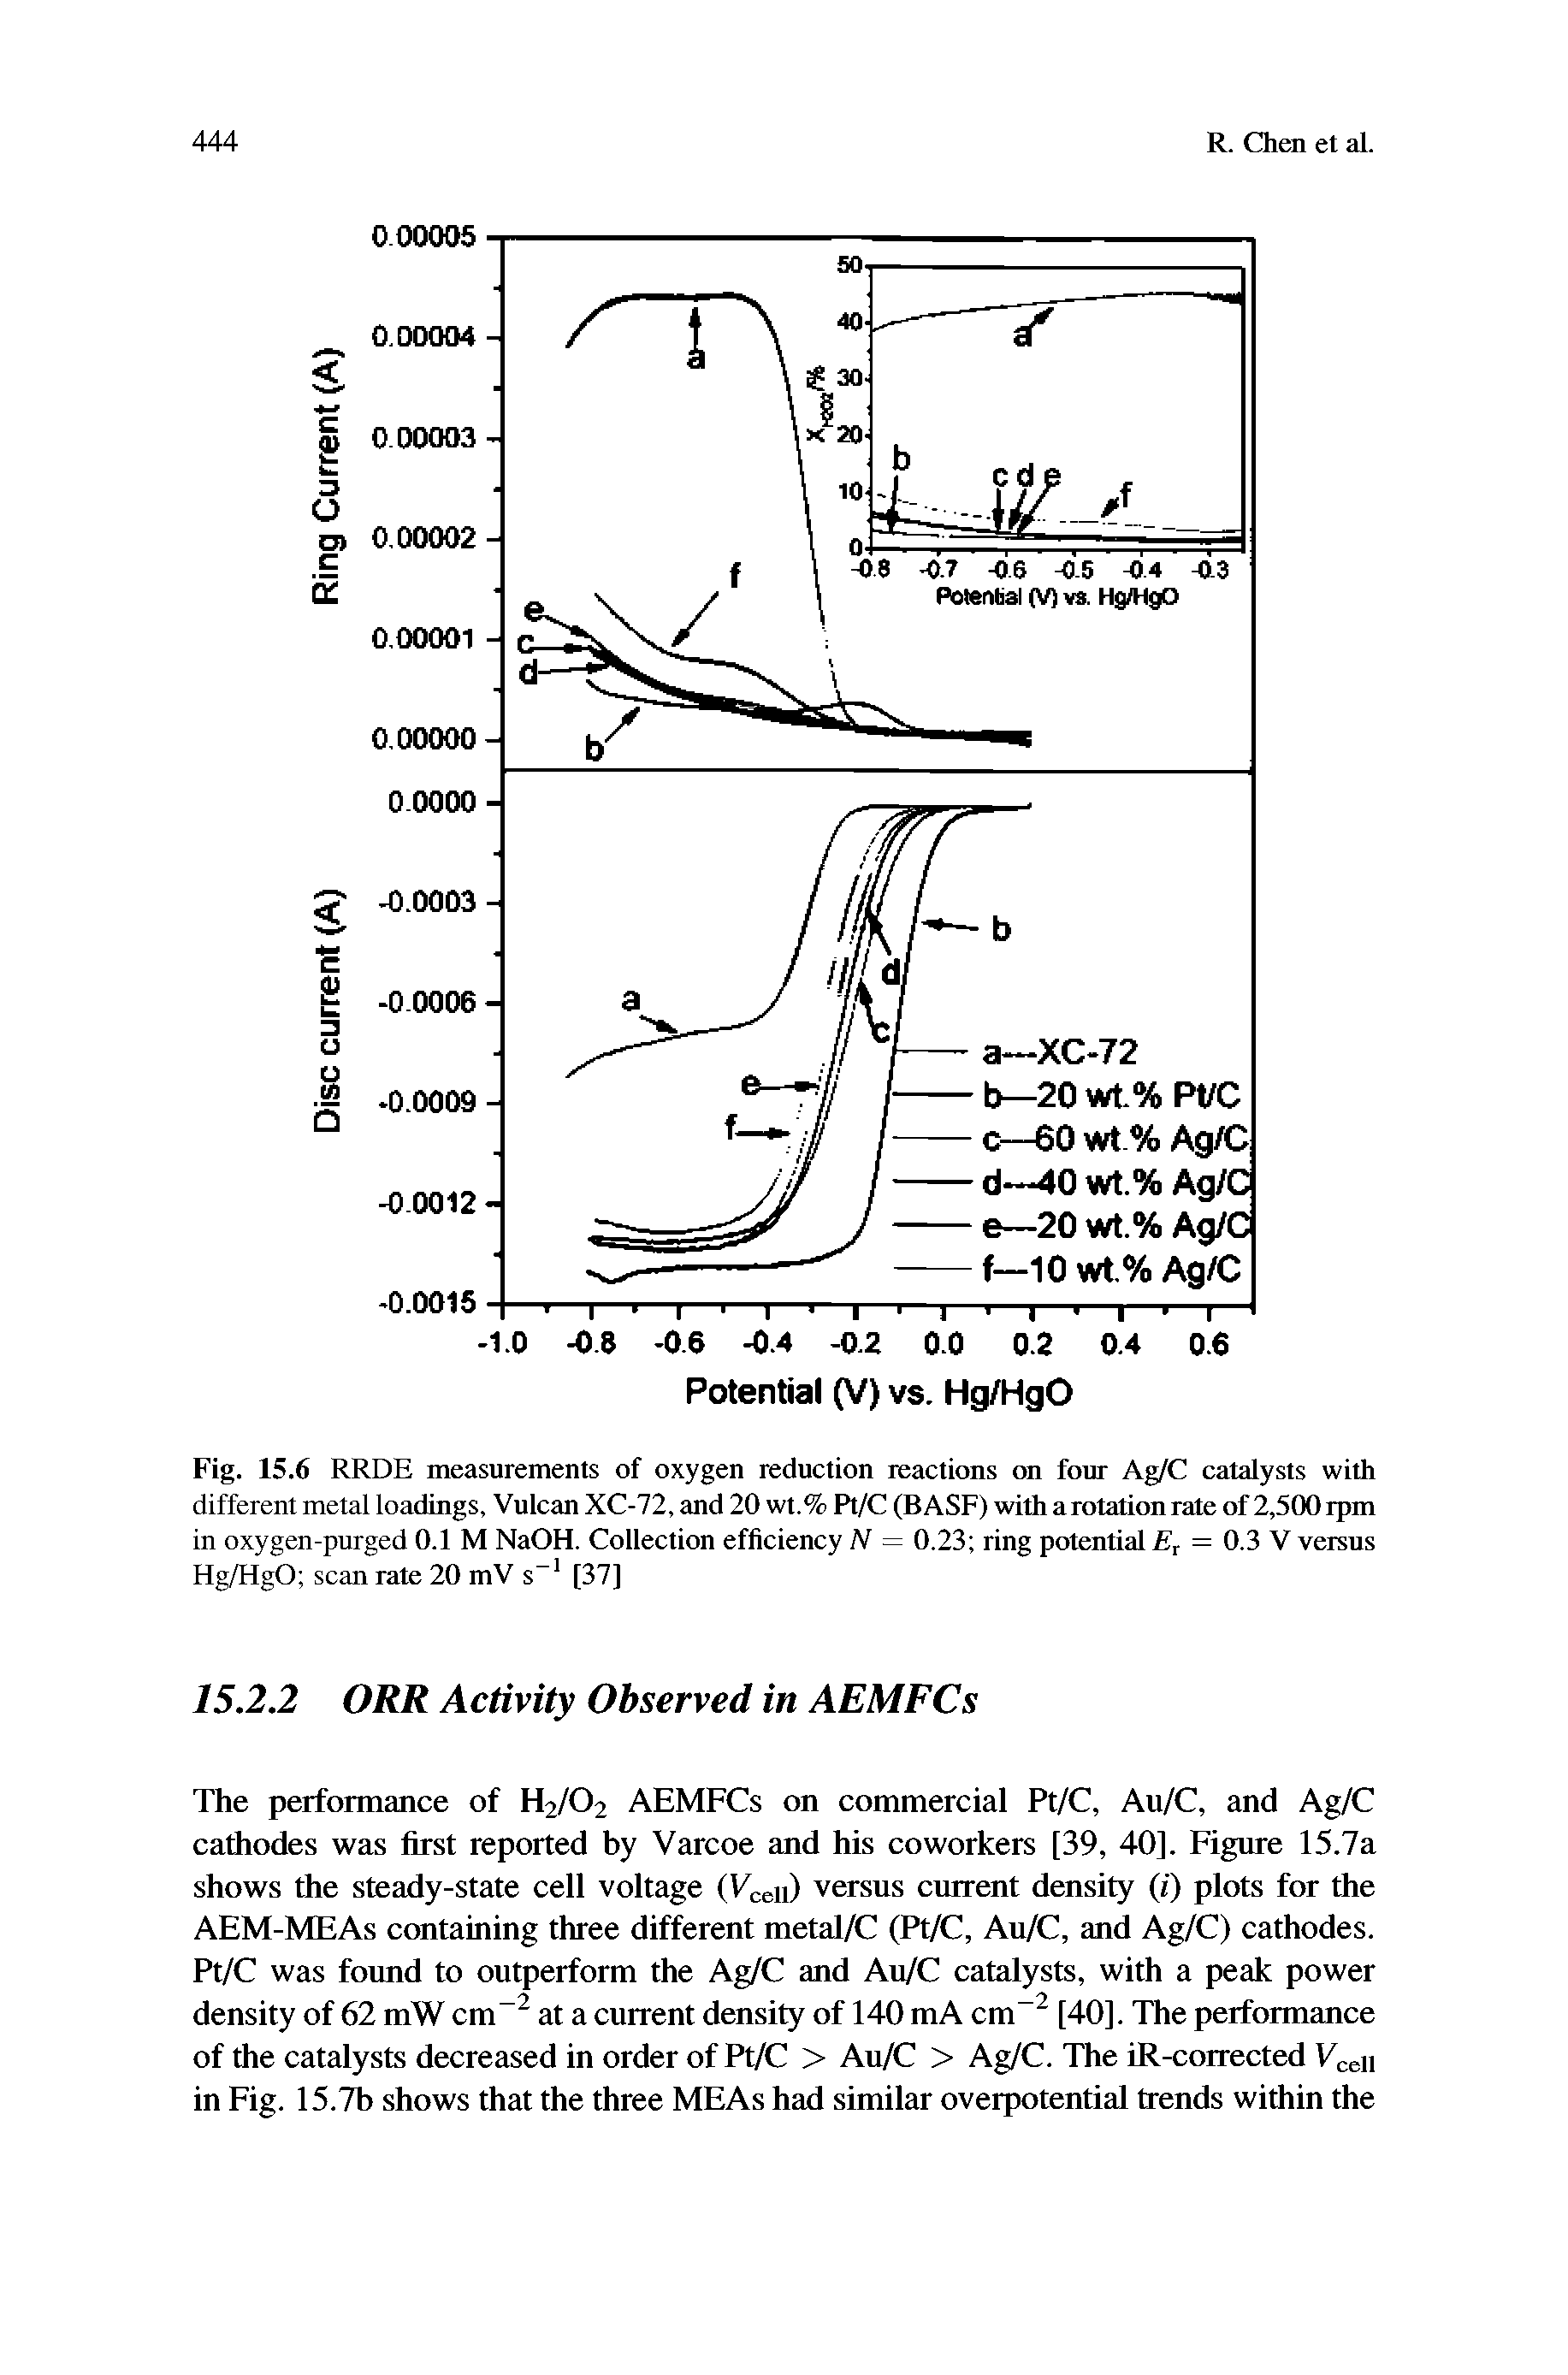 Fig. 15.6 RRDE measurements of oxygen reduction reactions on four Ag/C catalysts with different metal loadings, Vulcan XC-72, and 20 wt.% Pt/C (BASF) with a rotation rate of2,500rpm in oxygen-purged 0.1 M NaOH. Collection efficiency N = 0.23 ring potential , = 0.3 V versus Hg/HgO scan rate 20 mV s [37]...